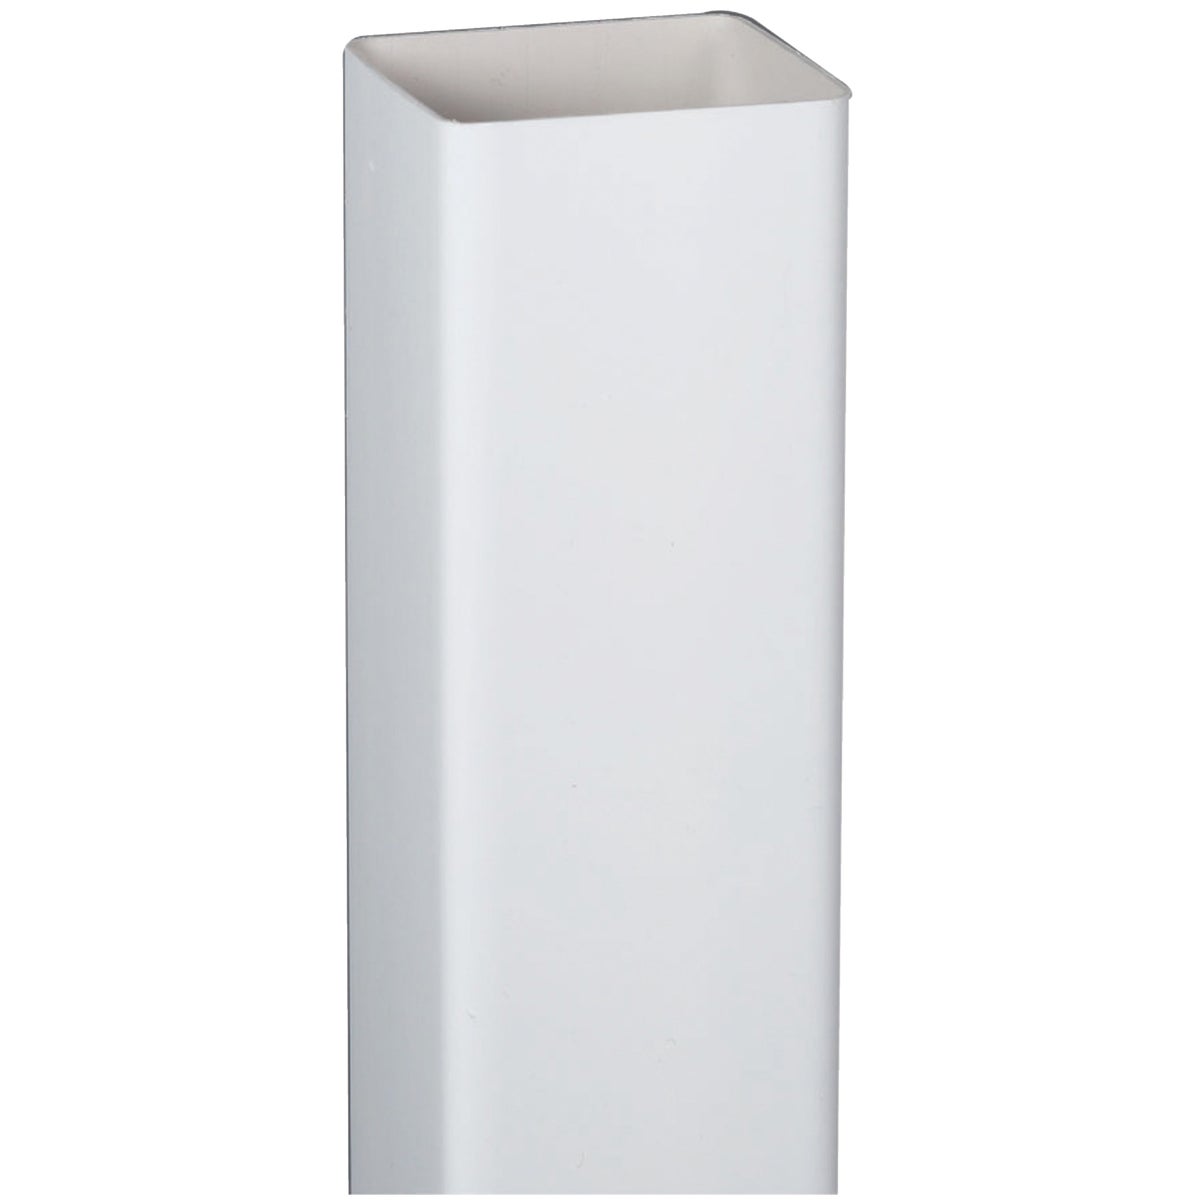 Amerimax 2 In. Square x 10 Ft. White Vinyl Downspout